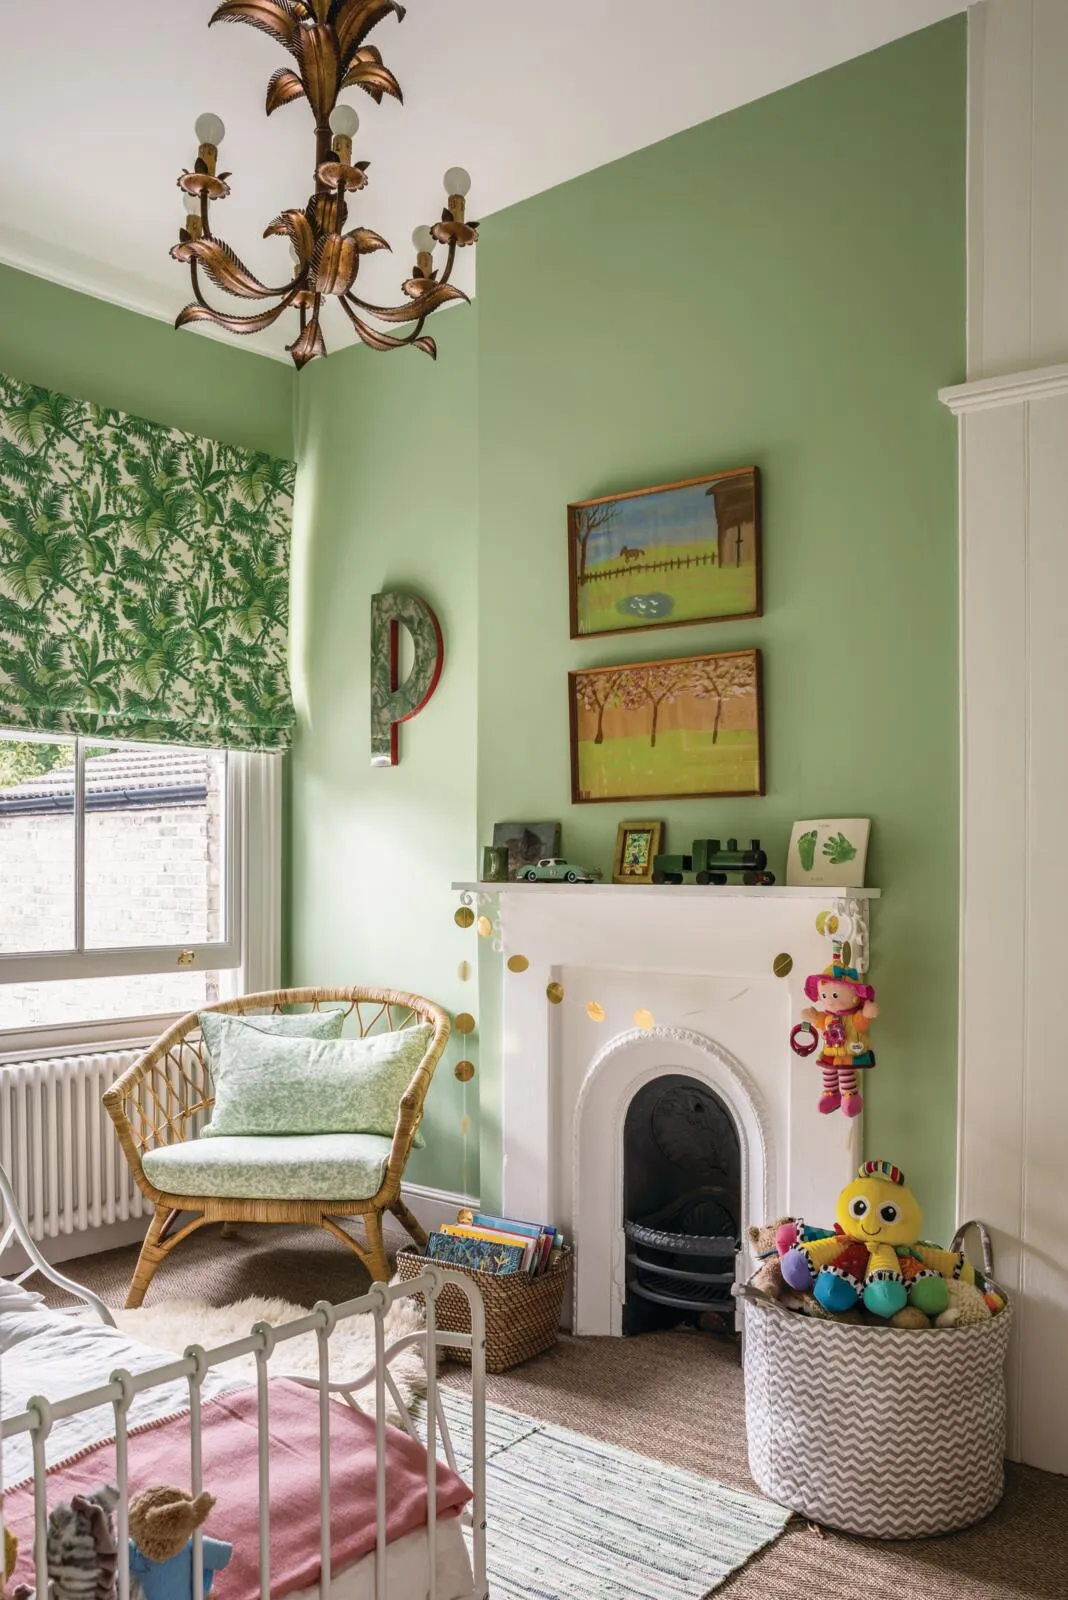 Victorian terrace filled with heirlooms